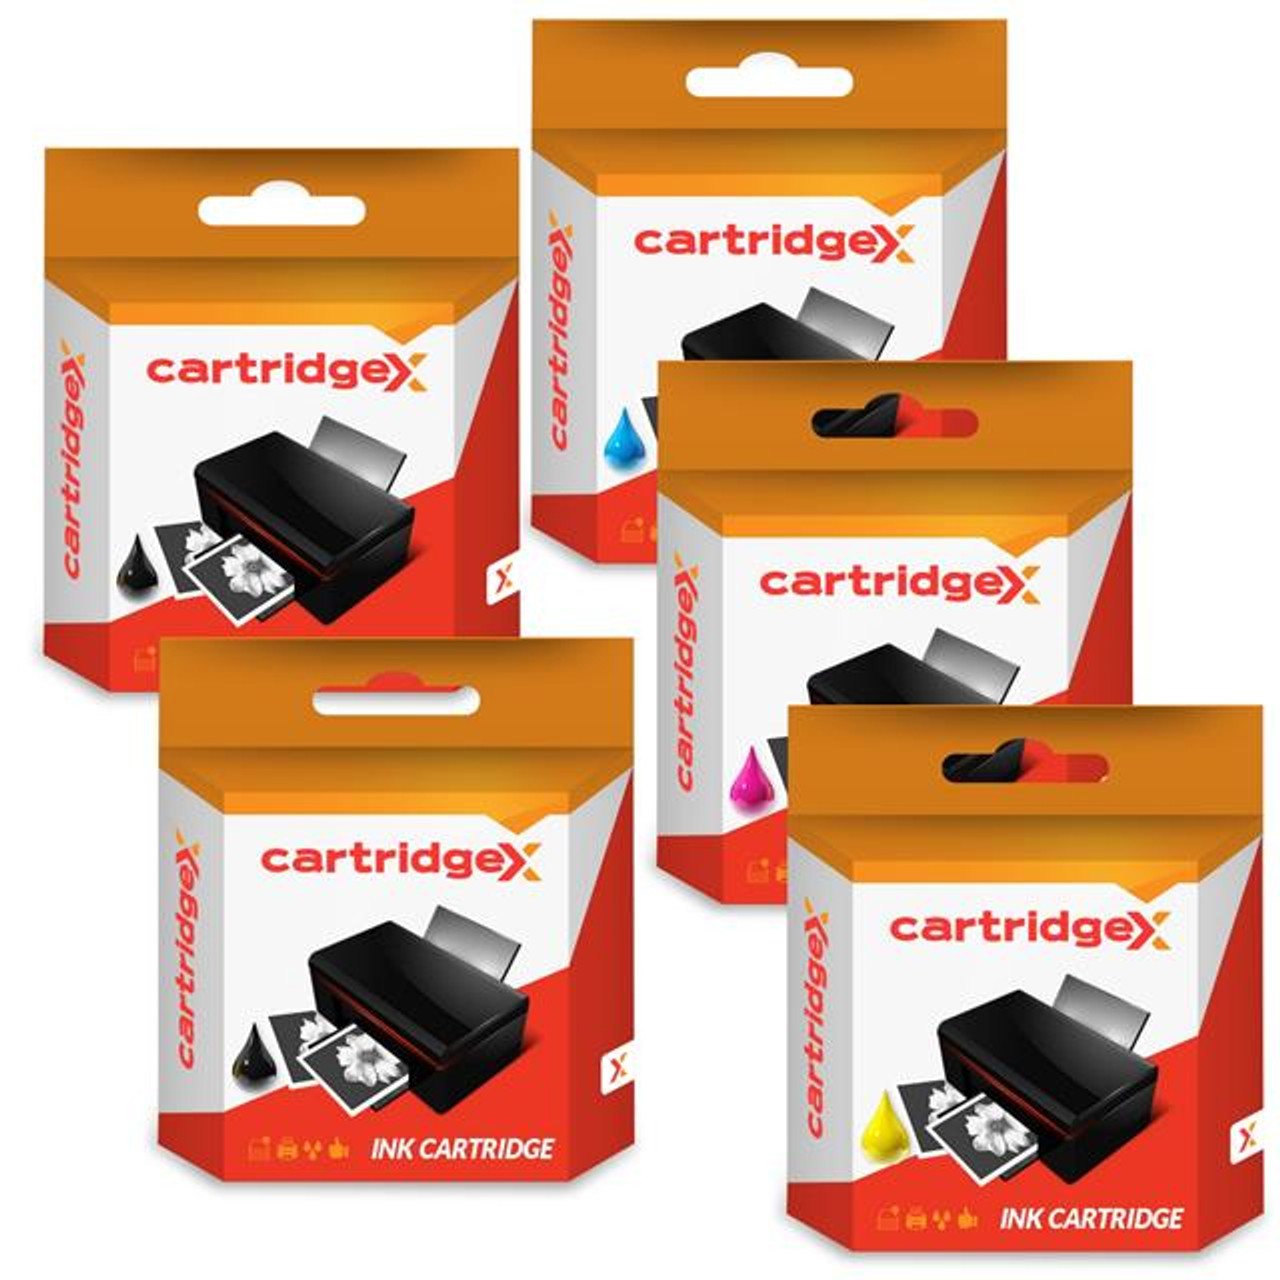 Compatible Set Of 5 Ink Cartridges For Pgi-525 & Cli-526 Canon Pixma Mg8170 Mg8220 Mg8250